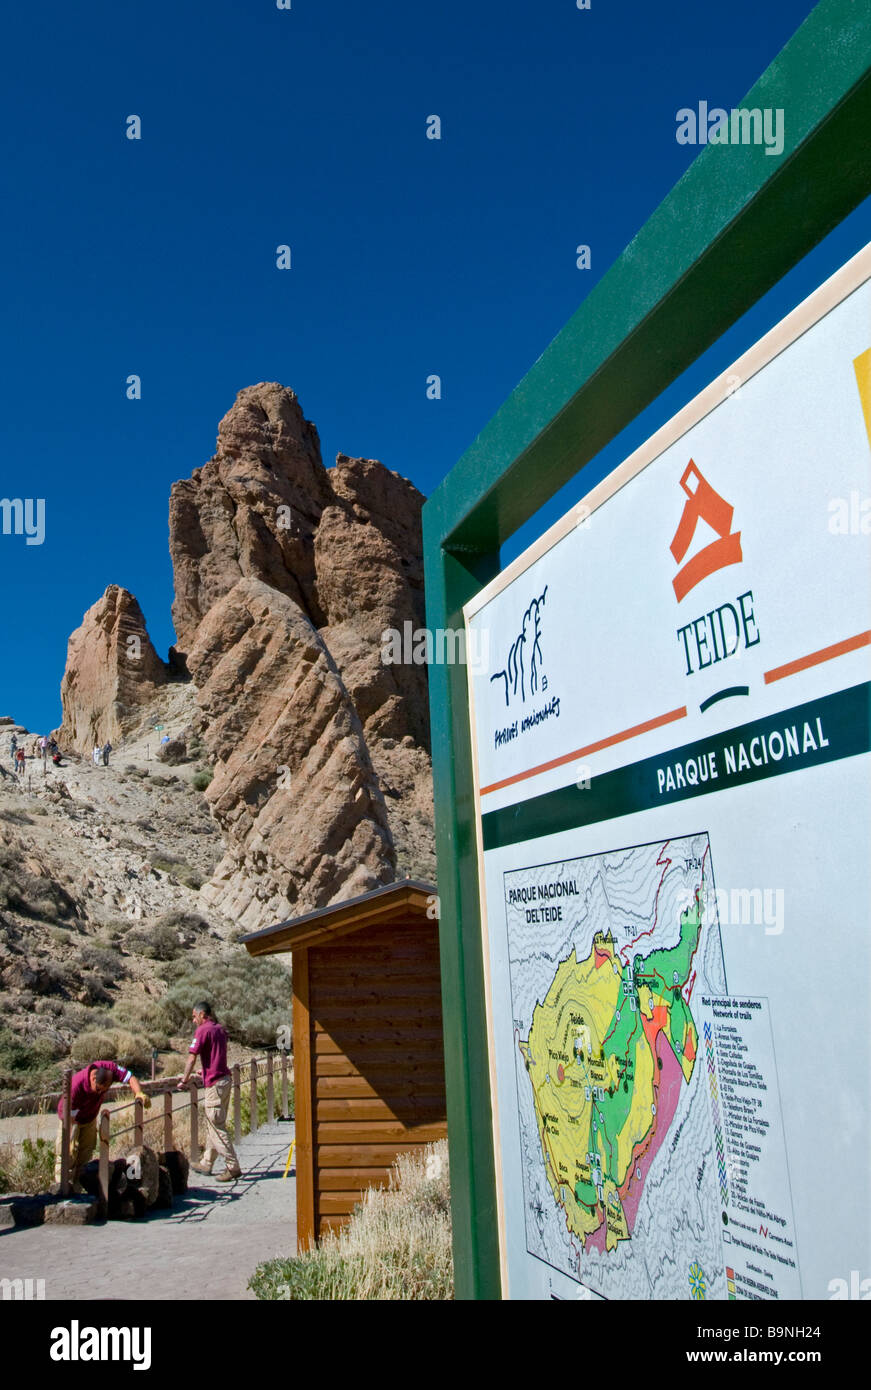 Map and entrance to Las Canadas and Mount Teide in Teide National Park Tenerife Canary Islands Spain Stock Photo